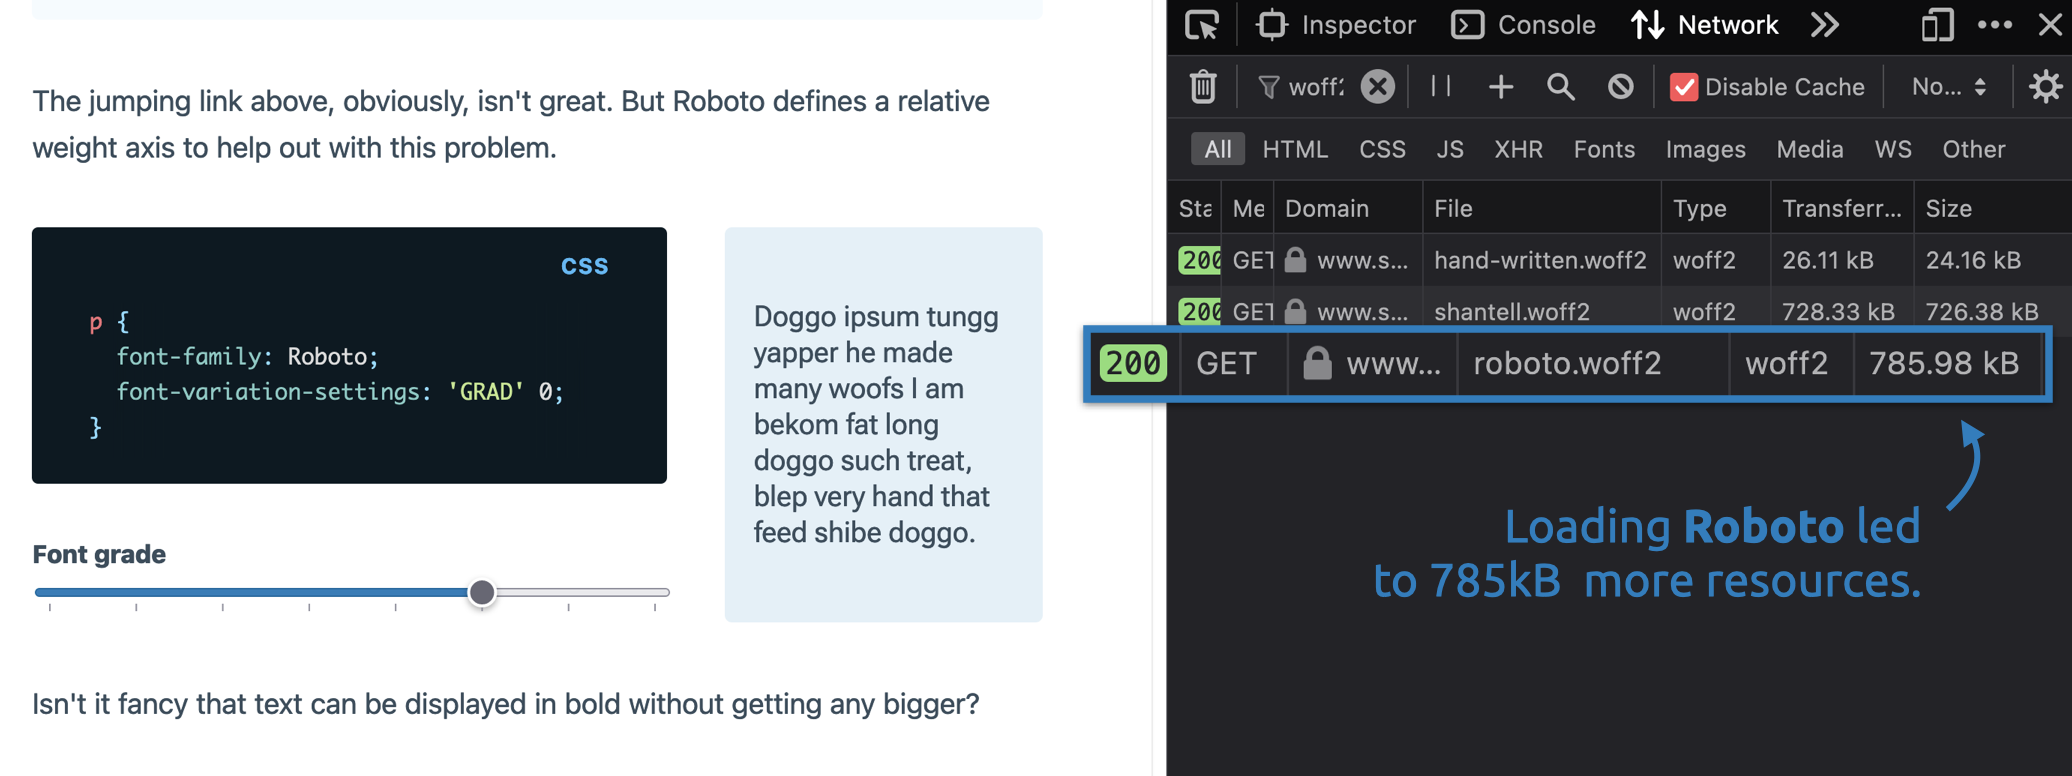 DevTools showing the 785bK weight of Roboto.